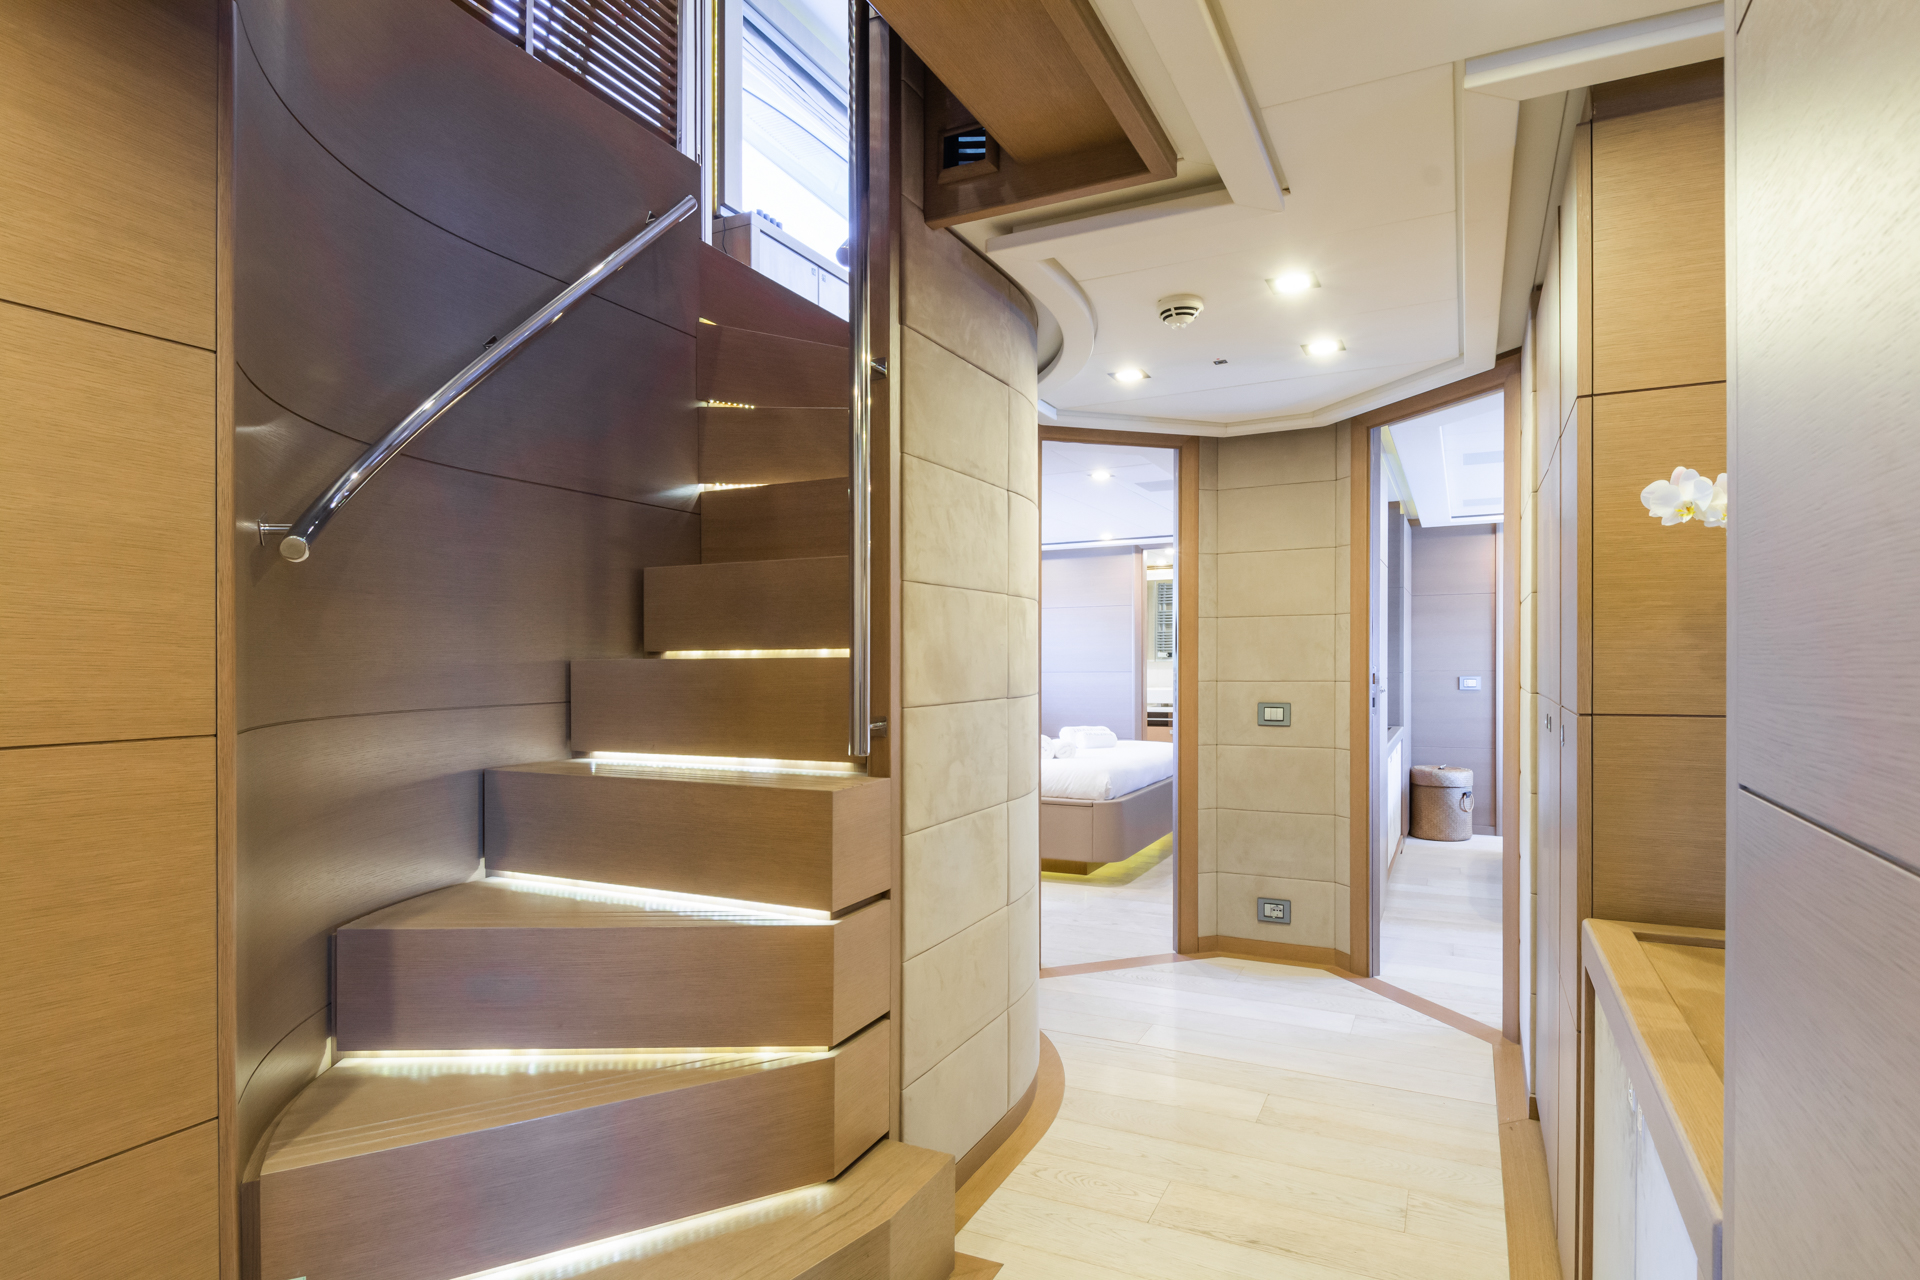 Stairwell To Below Deck Accommodation